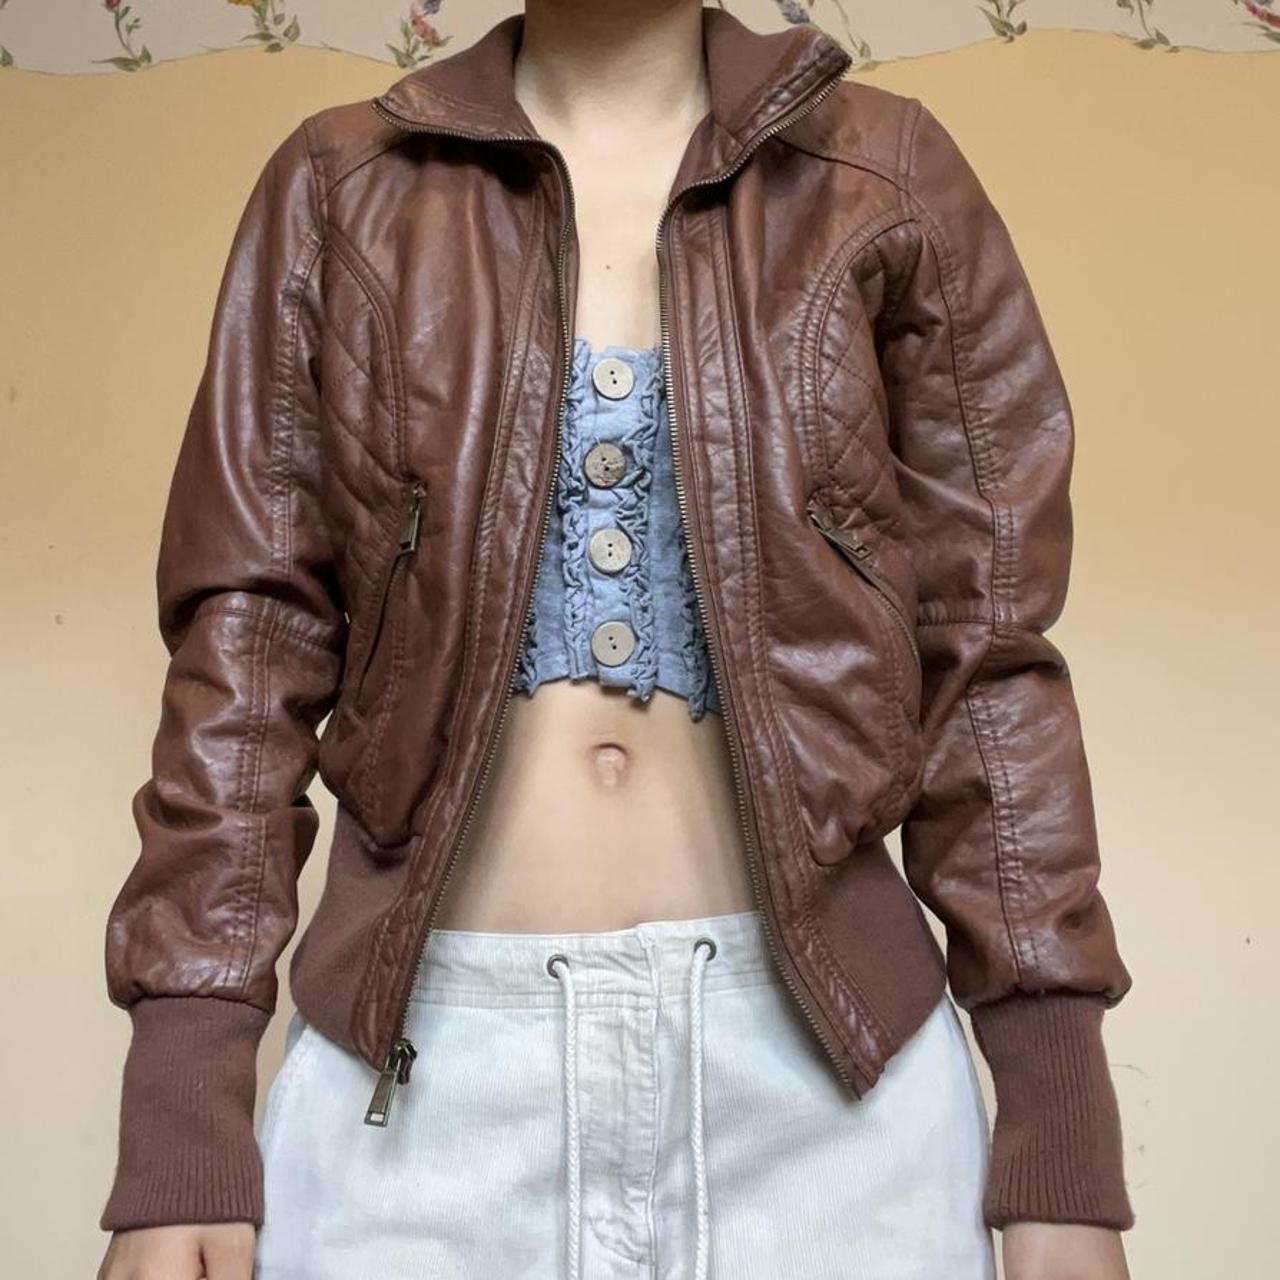 Adele Fado Womens Brown Leather Bomber Jacket Size 44 Made in